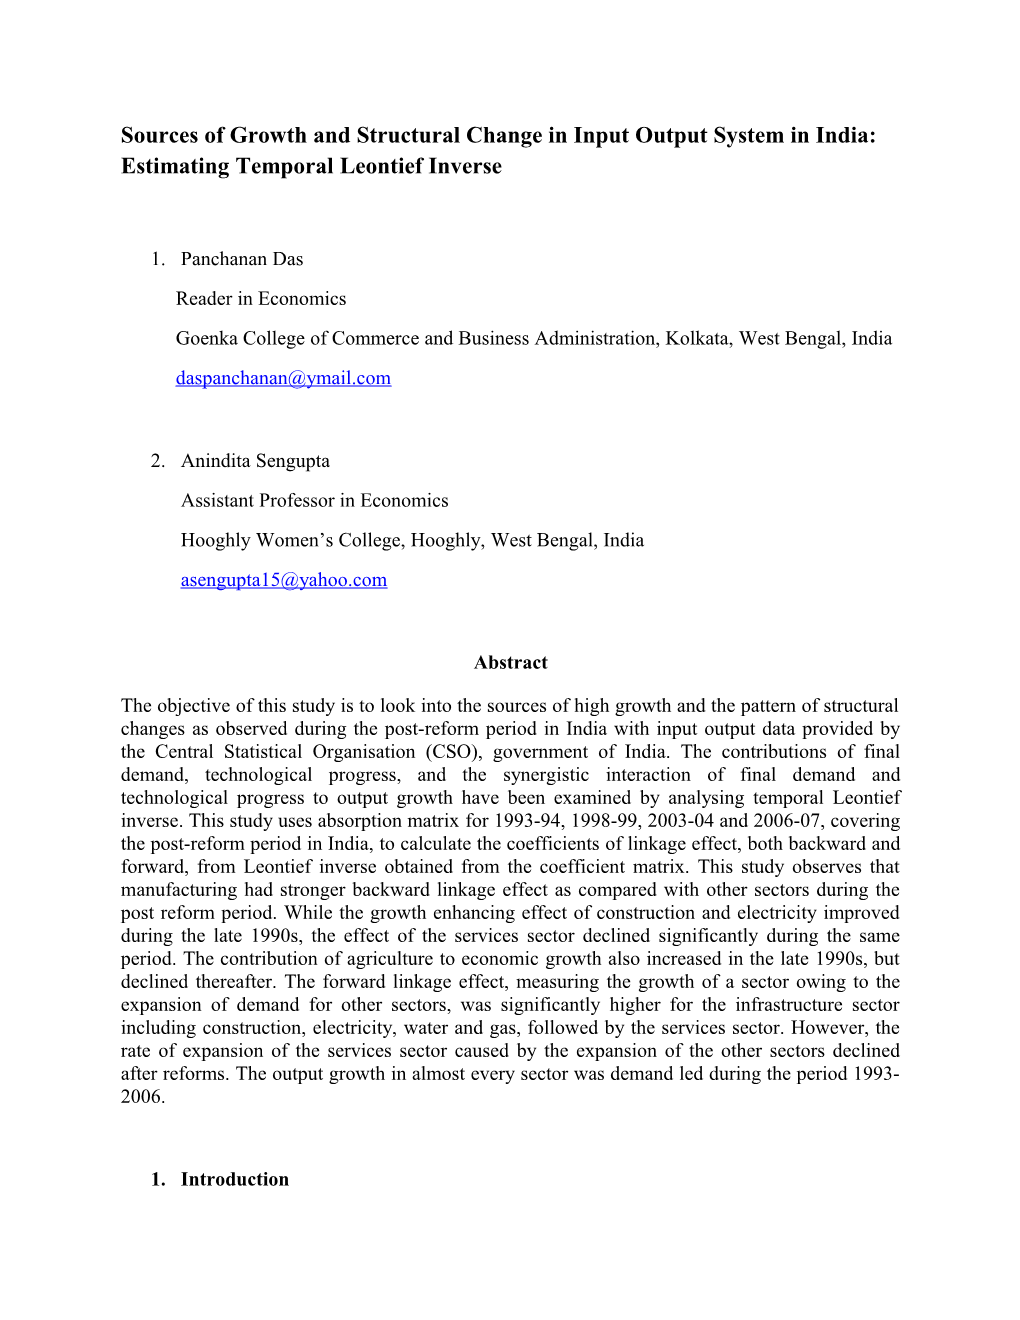 Sources of Growth and Structural Change in Input Output System in India: Estimatingtemporal